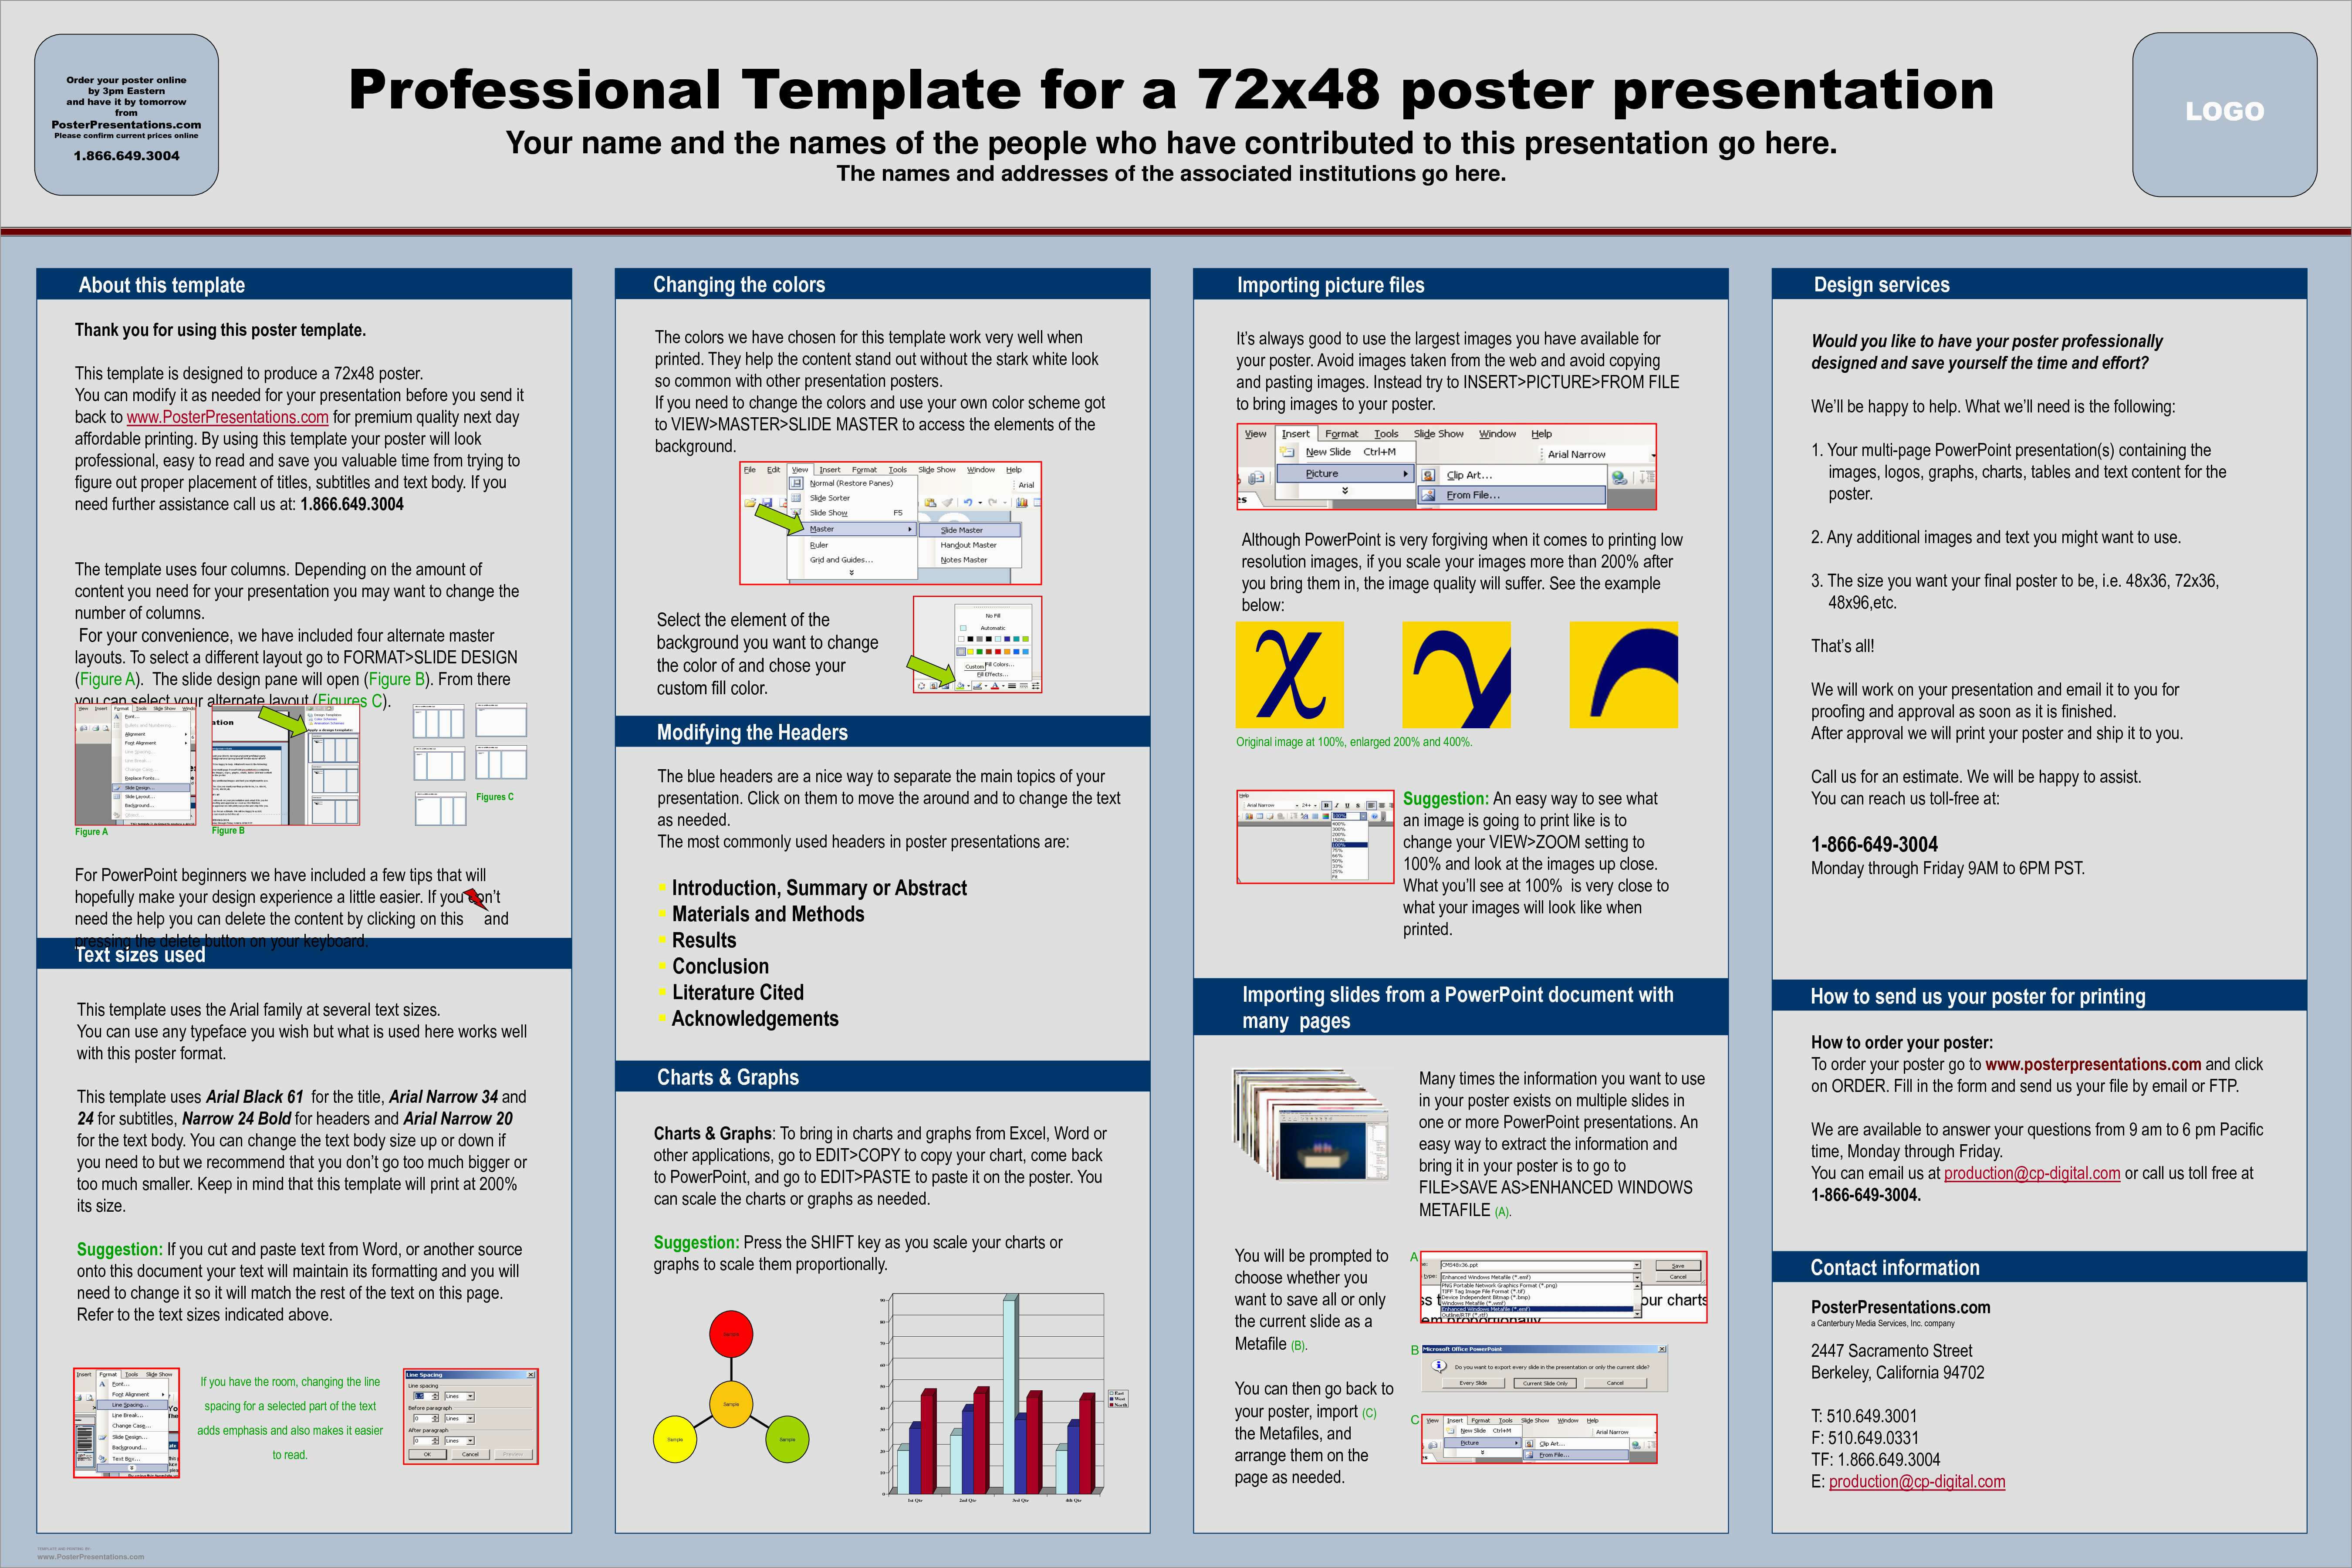 powerpoint-poster-template-a3-size-a4-ppt-a1-academic-free-inside